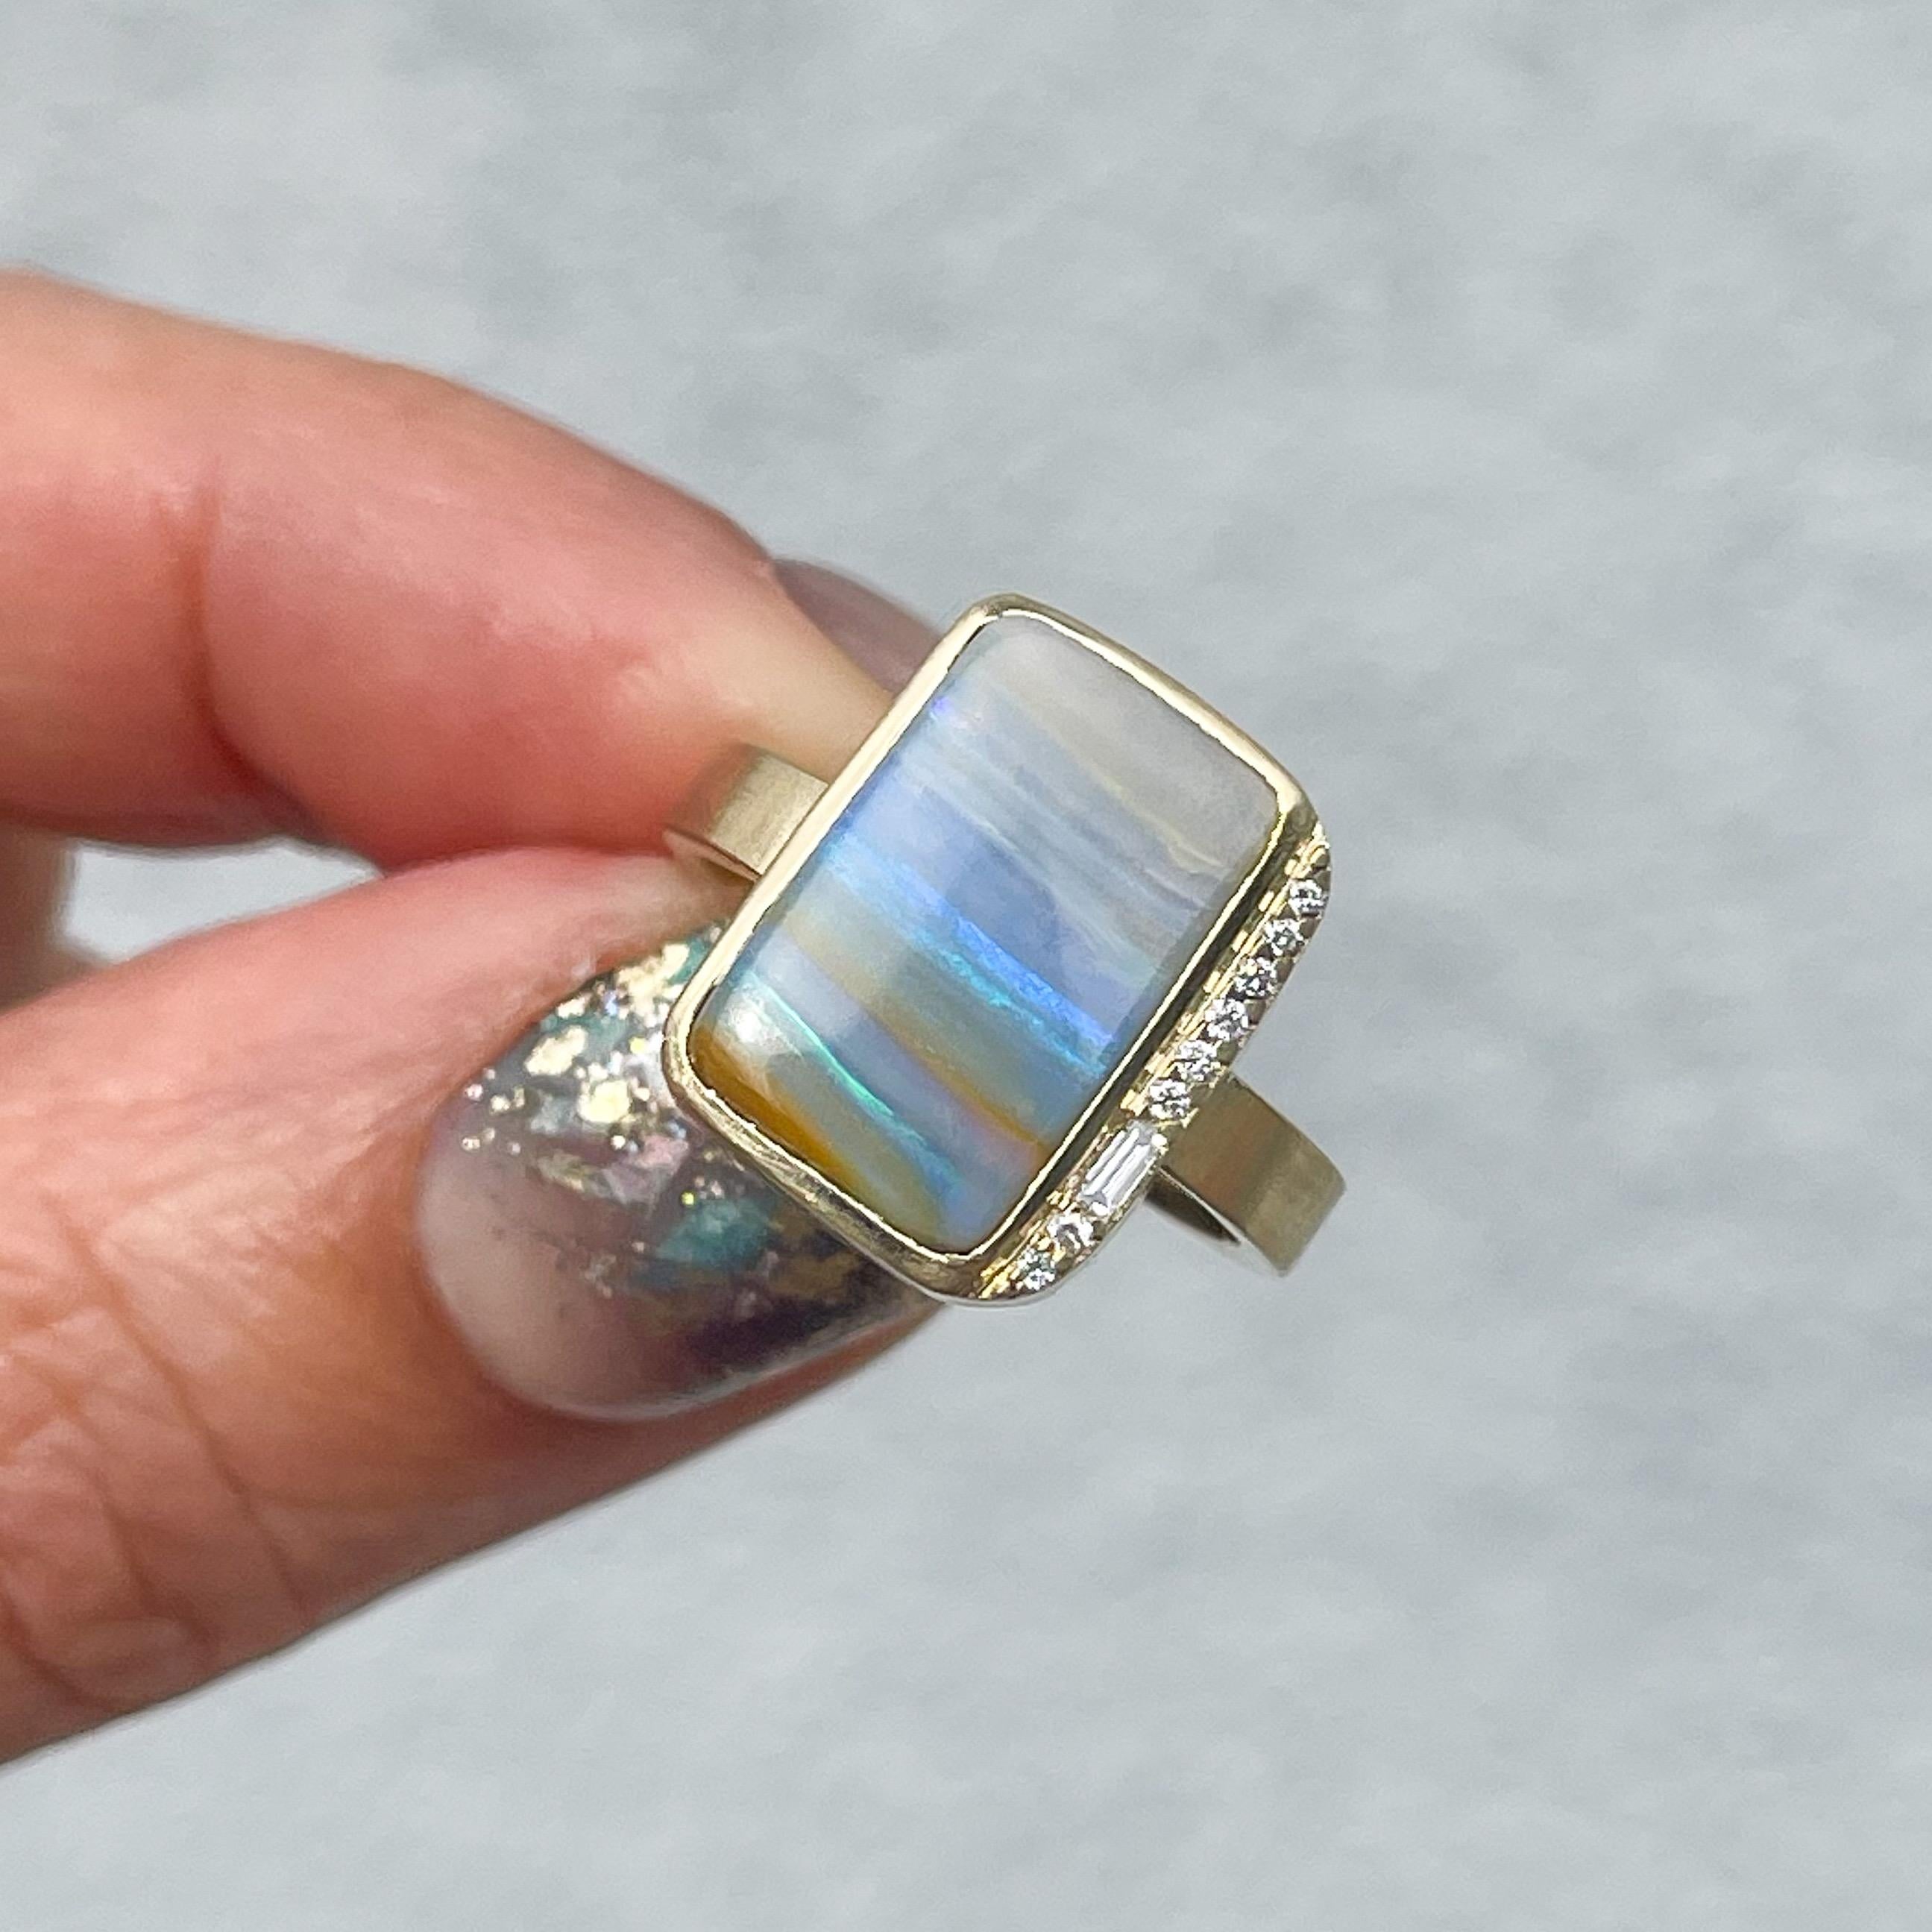 Chantilly Skies Australian Opal Ring with Diamonds in 14k Gold by NIXIN Jewelry For Sale 1